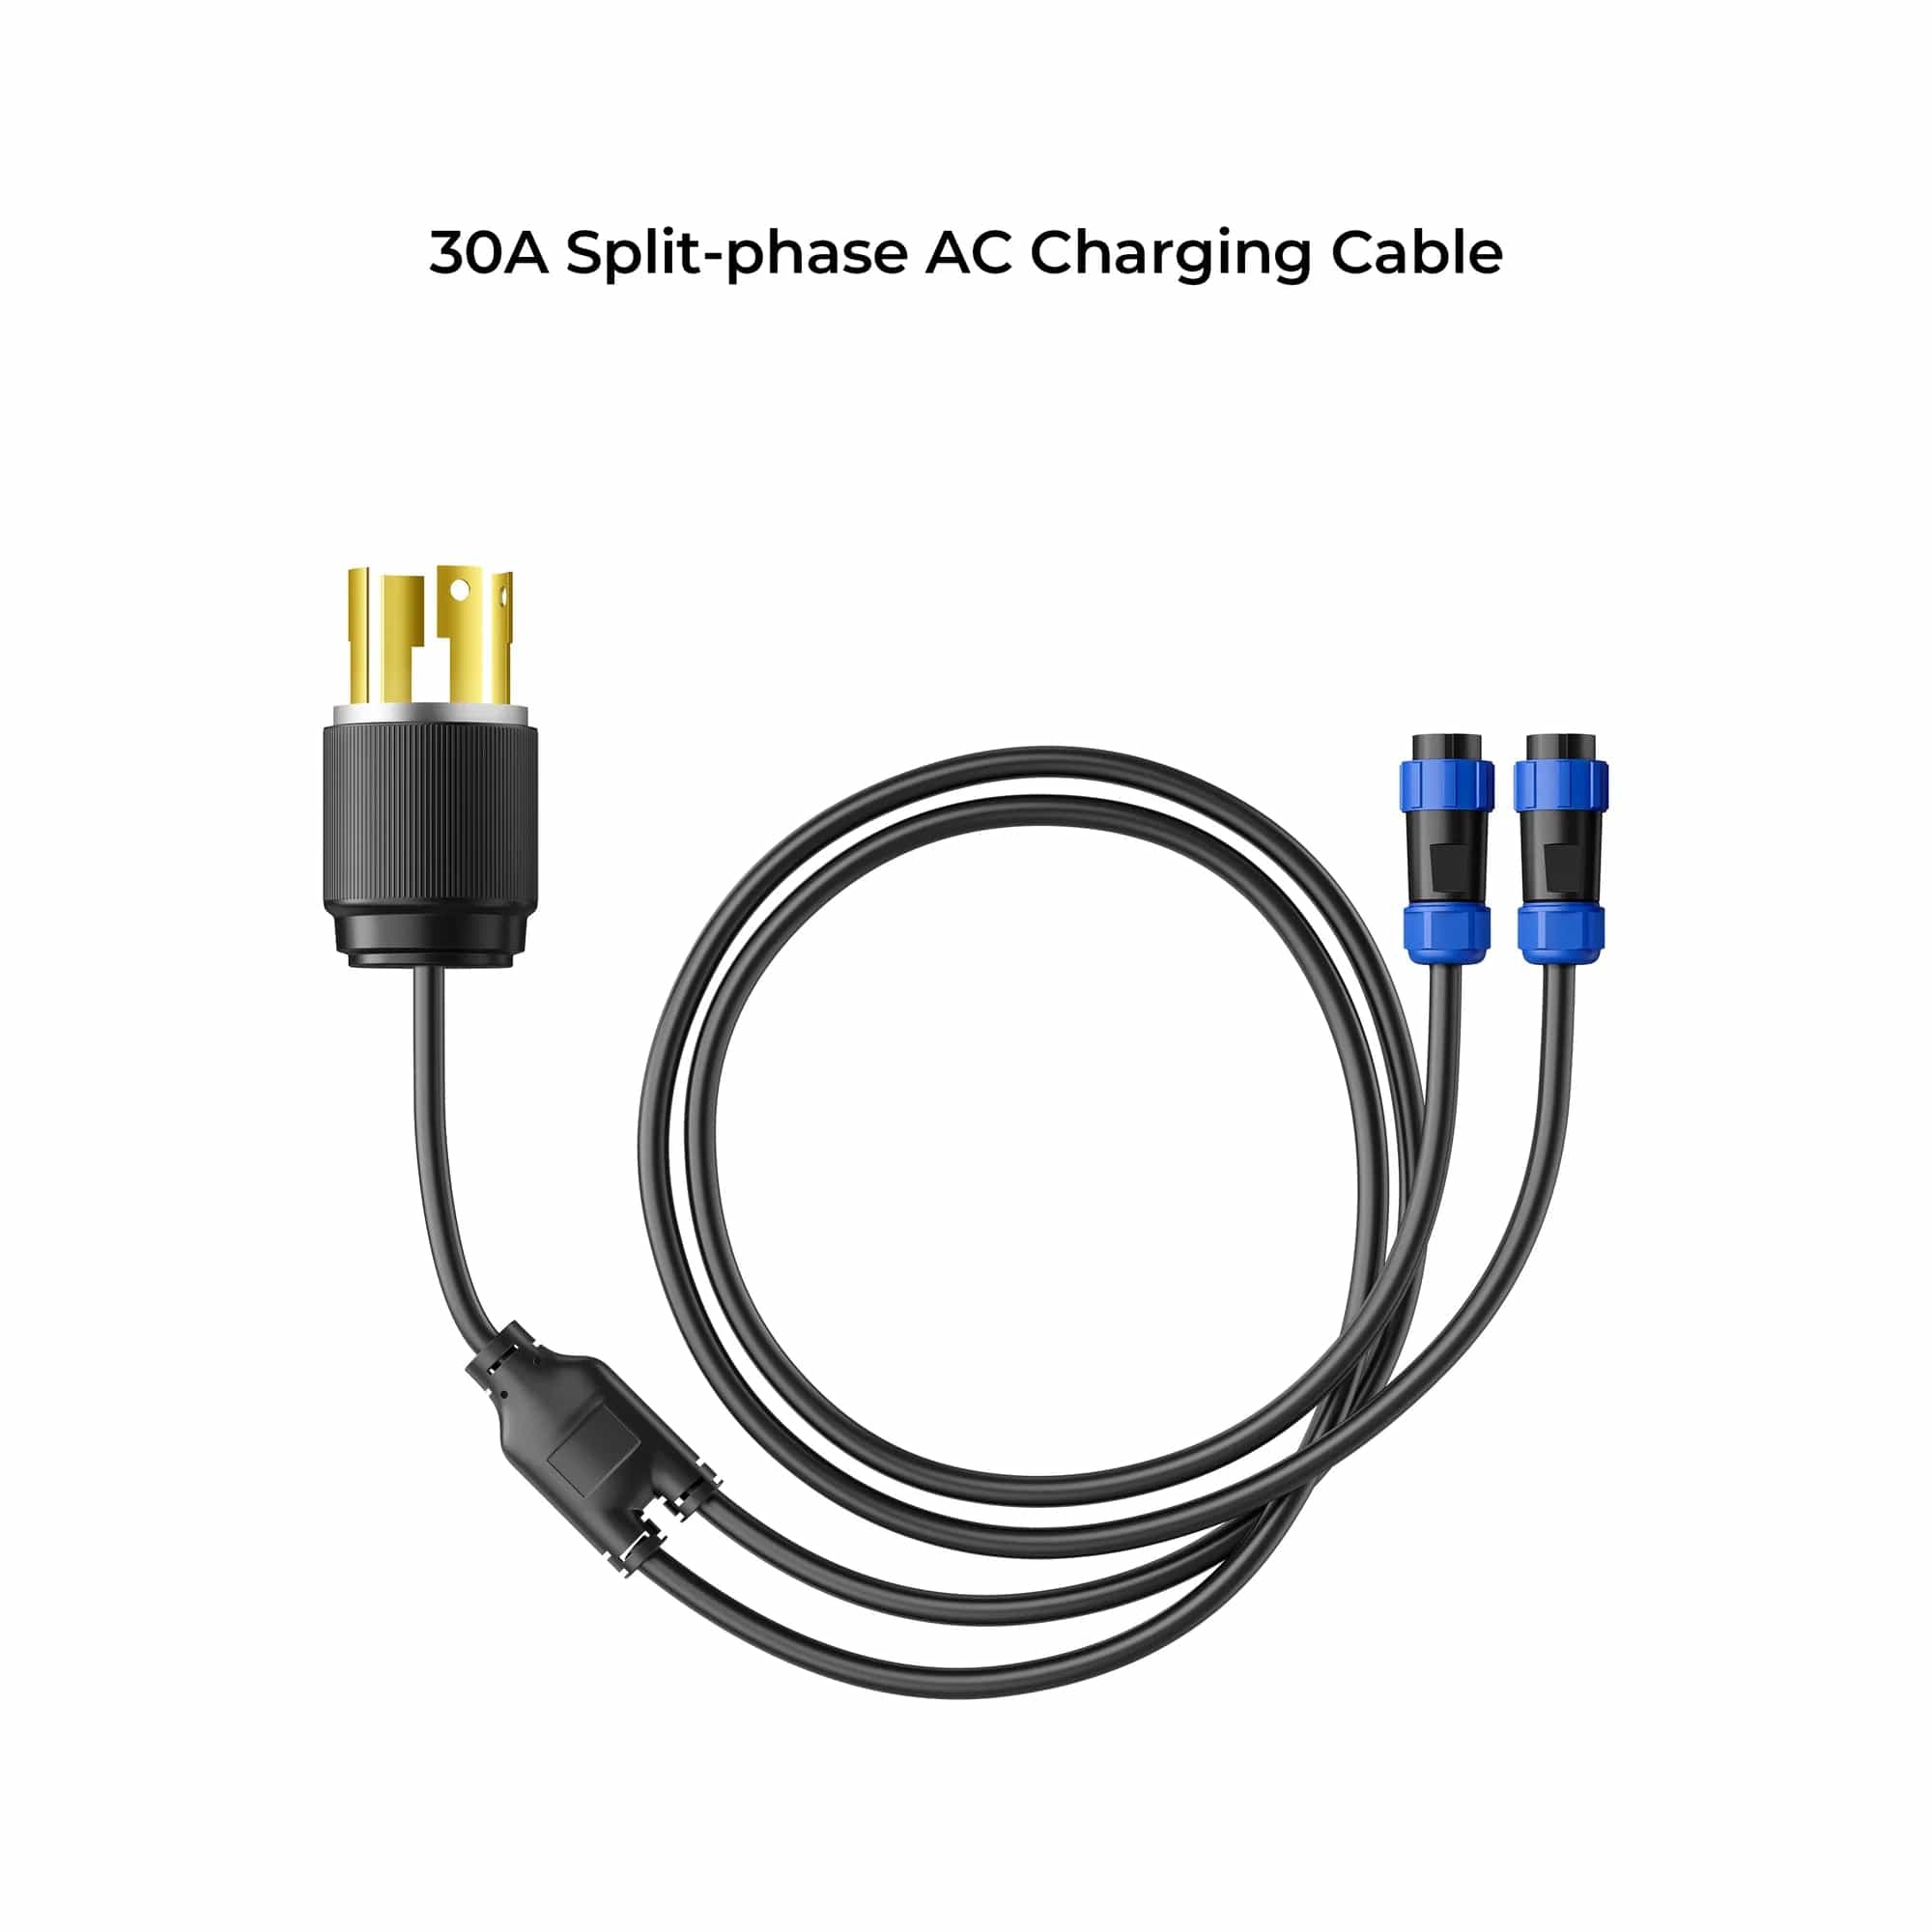 Bluetti Power Station Bluetti 30A AC Charging Cable For Split-Phase